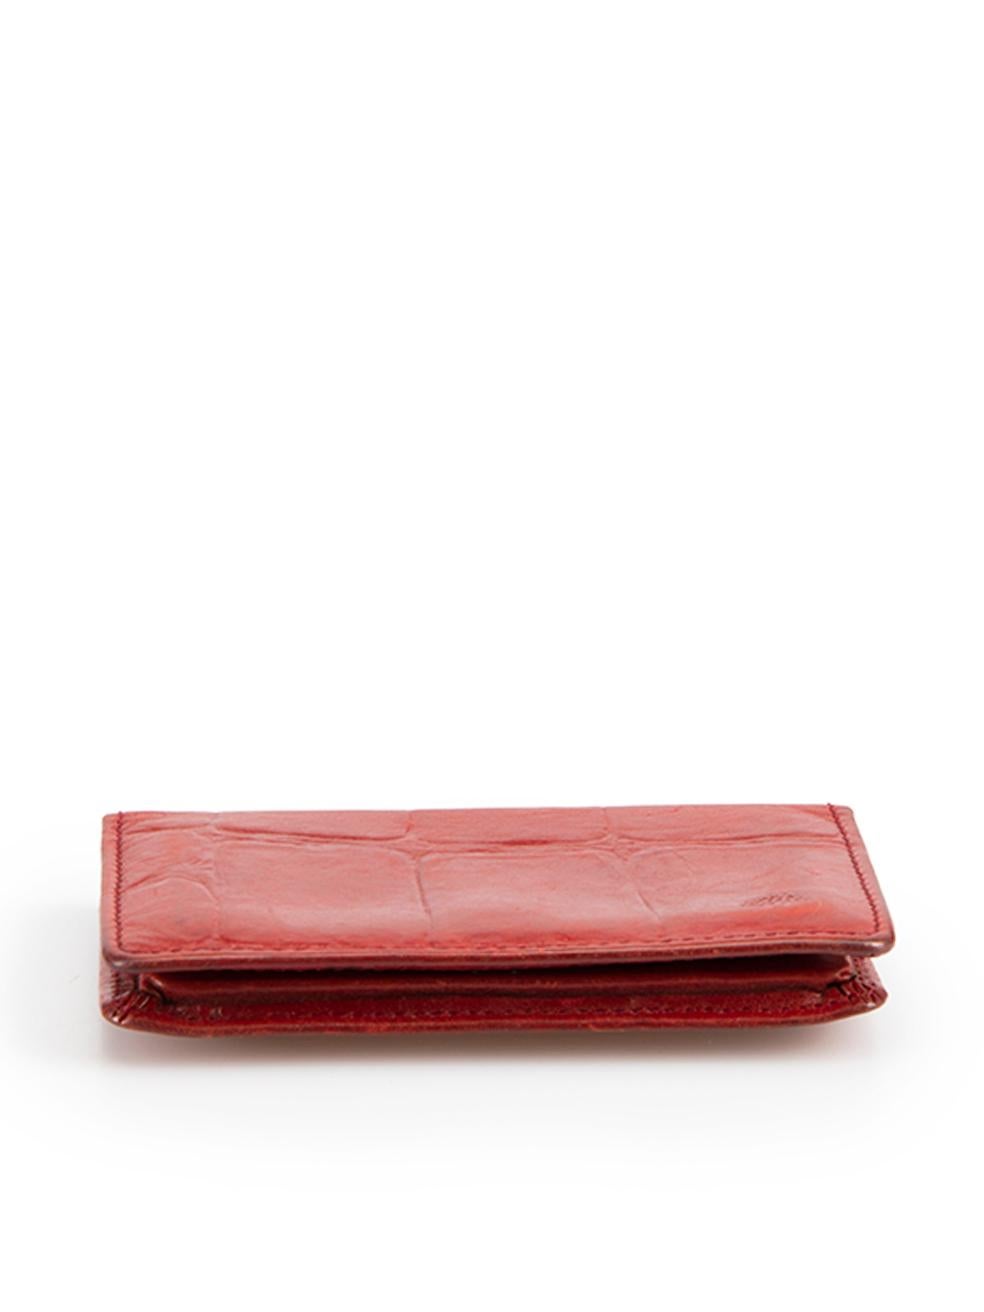 Mulberry Women's Vintage Red Leather Croc Embossed Card Holder 1